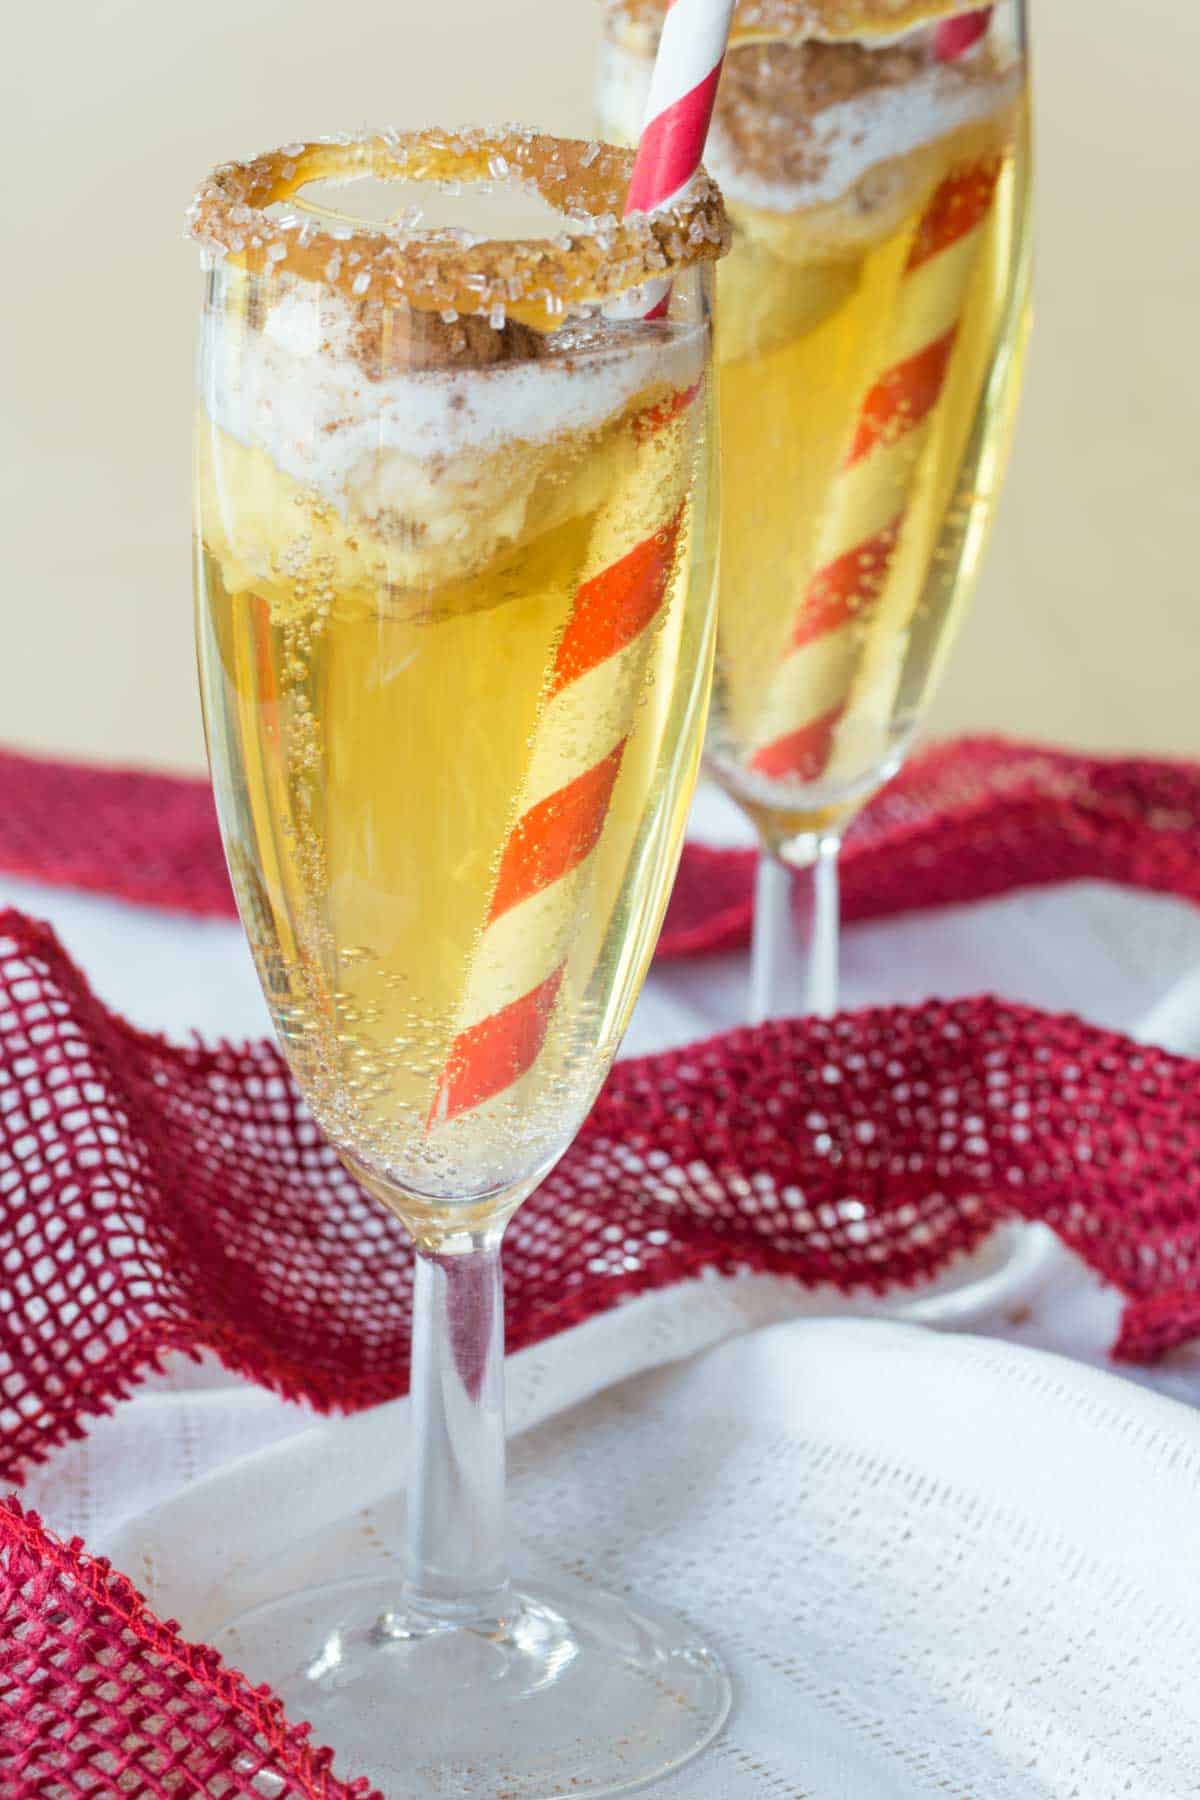 two flutes of sparkling cider with a small scoop of ice cream floating in them